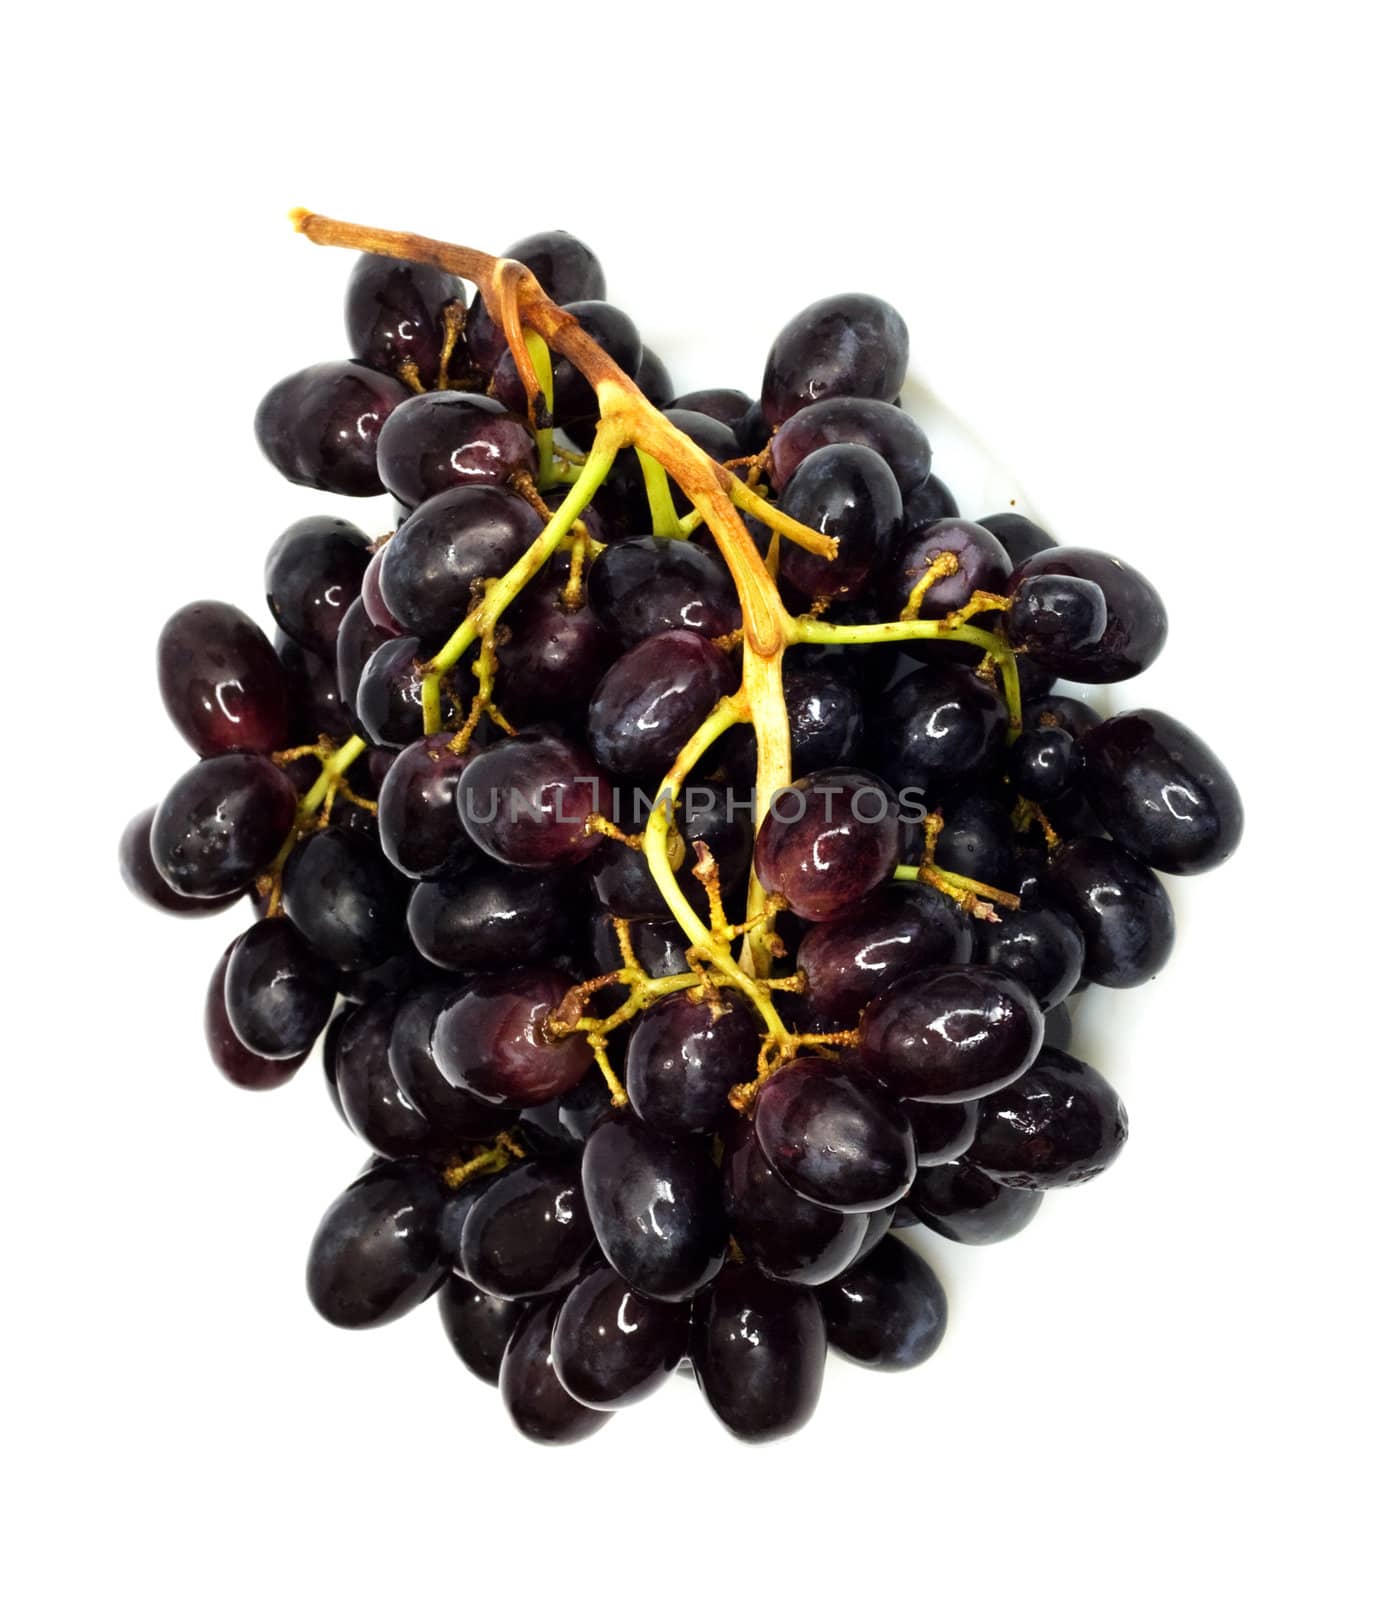 Bunch of black grapes isolated on white background 